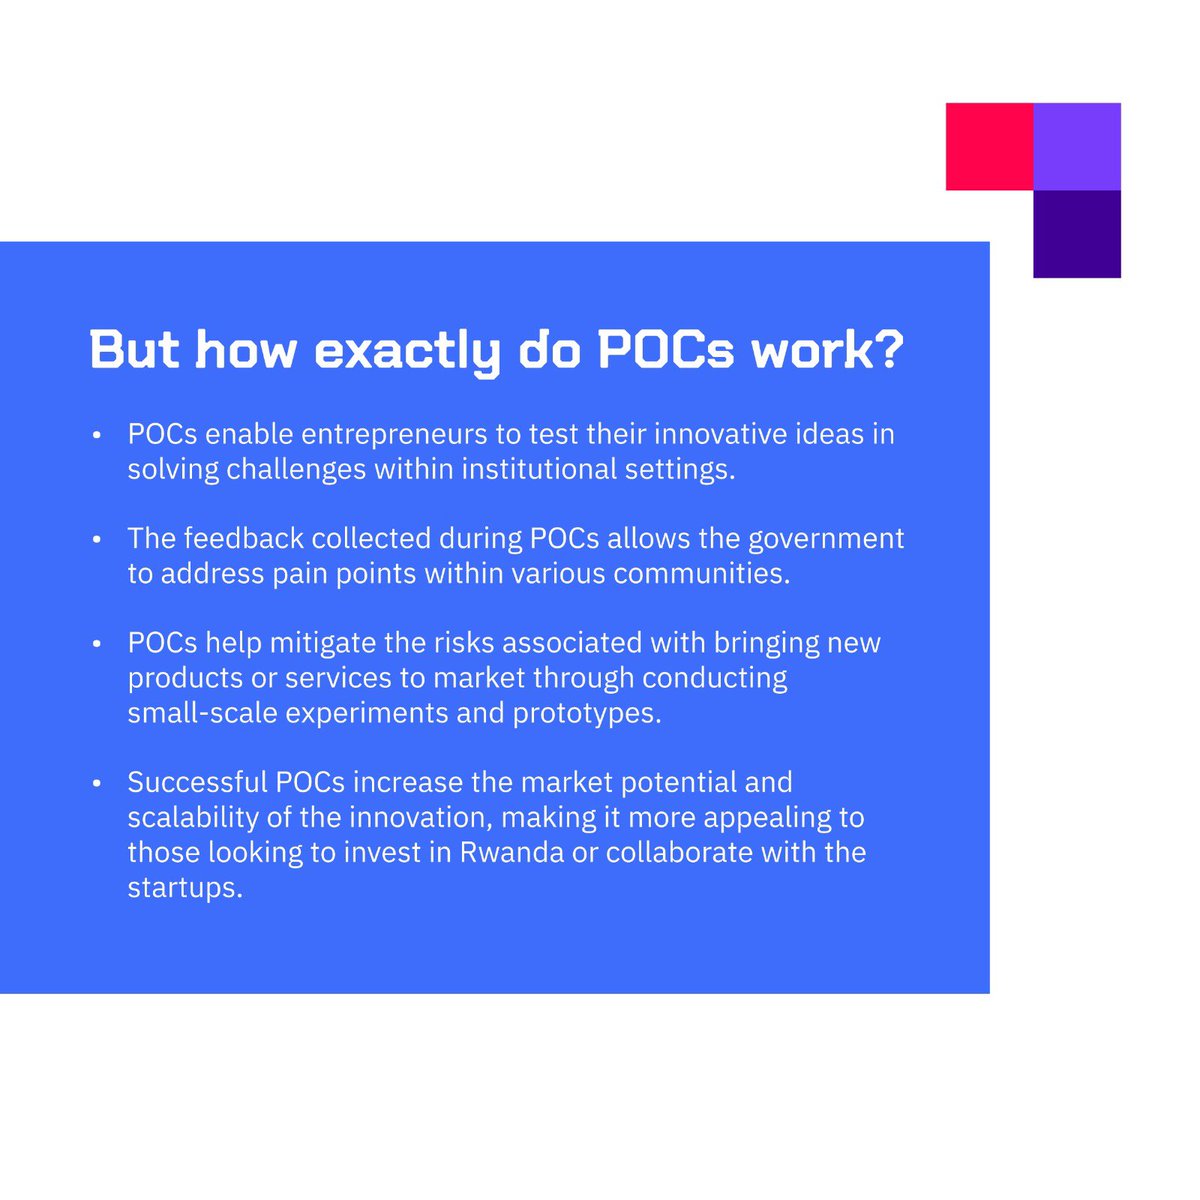 Want to know what makes POCs the ultimate innovation catalyst? Here's a glimpse into how they work💡
#InnovateRwanda #DigitalLeapRwanda #JICA